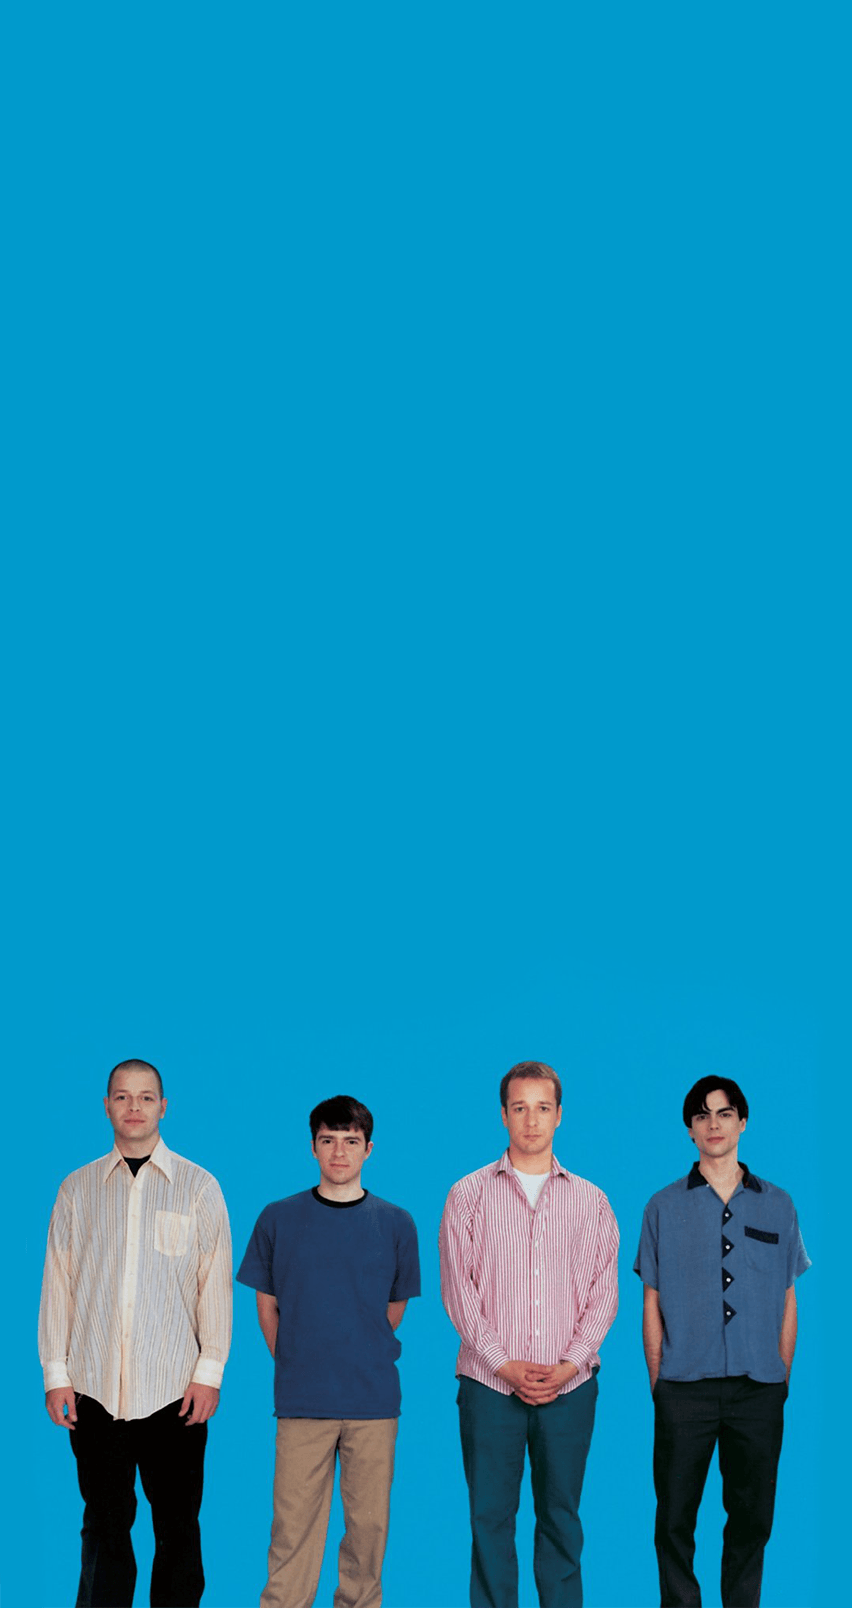 Weezer iPhone wallpaper. Blue, Pinkerton, Green and Red